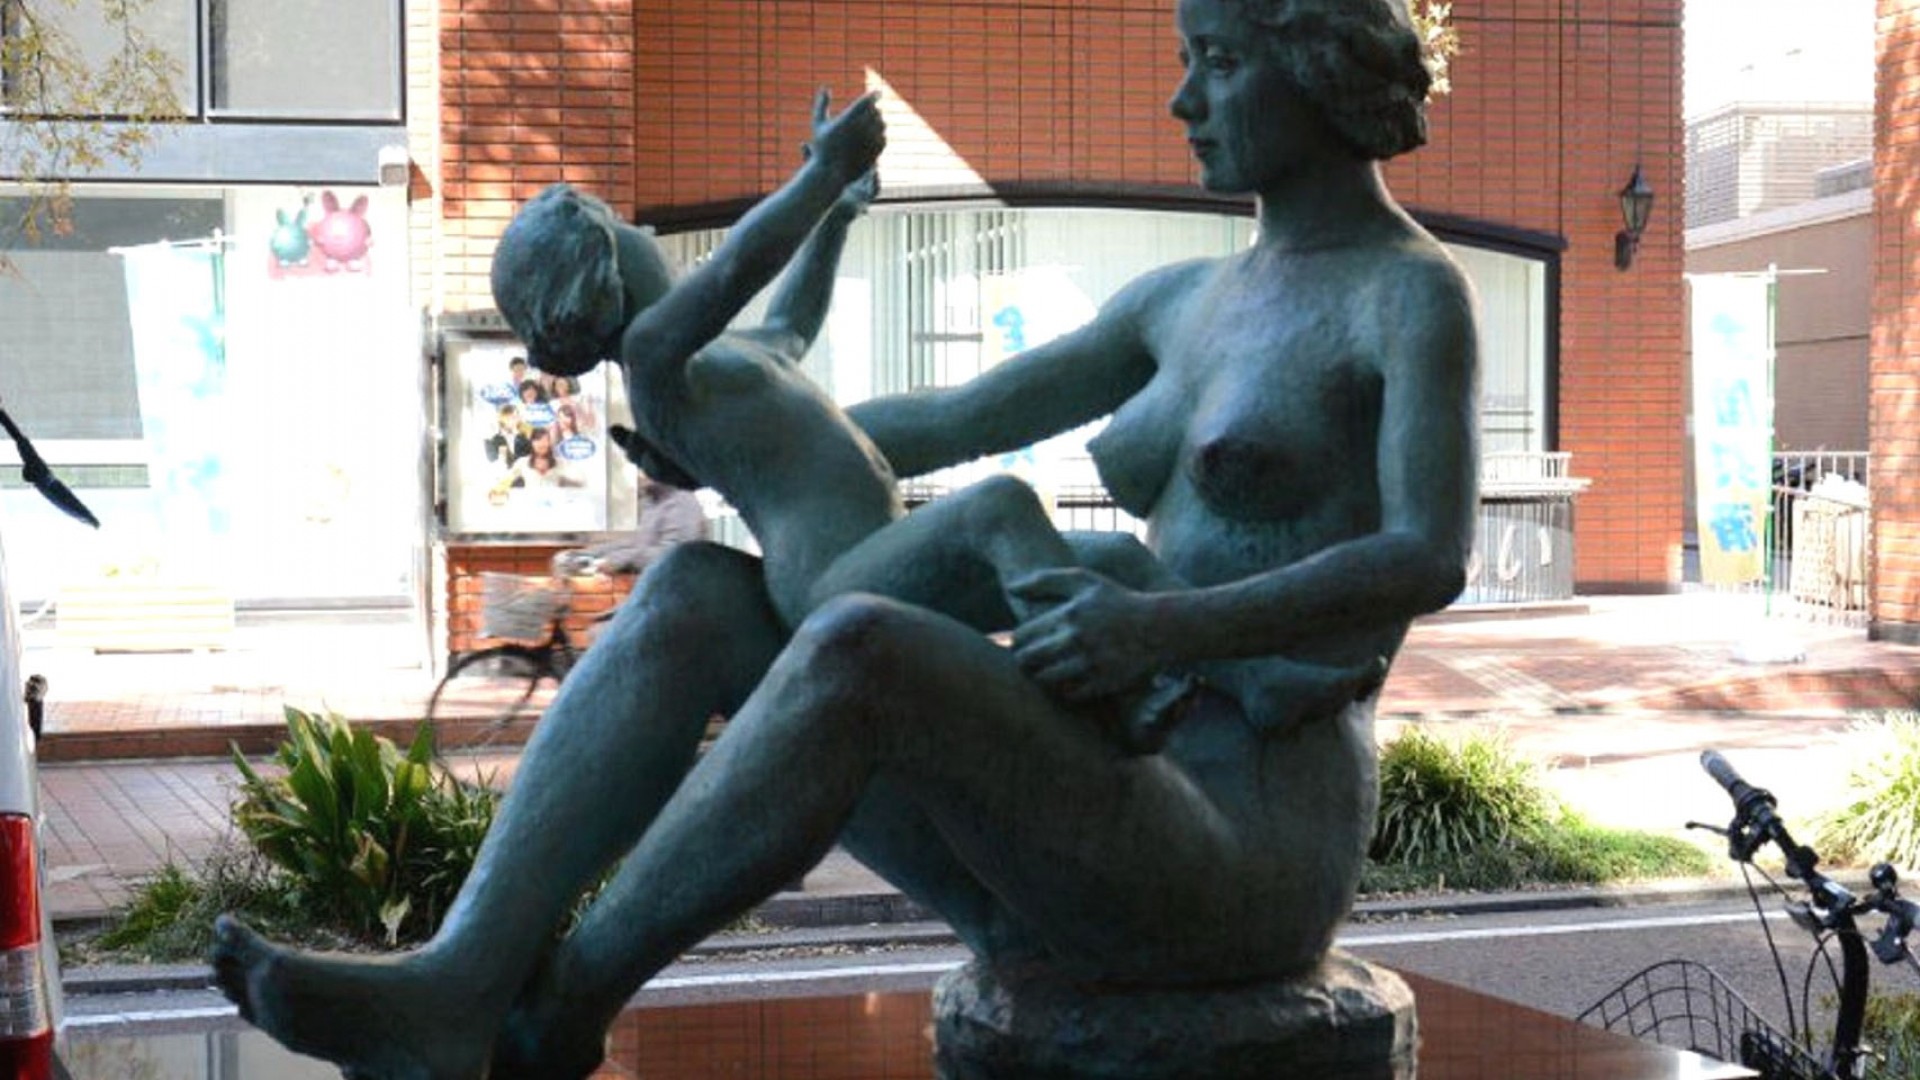 Monument to the origin of ice cream in Japan, "Mother and Child of the Sun"